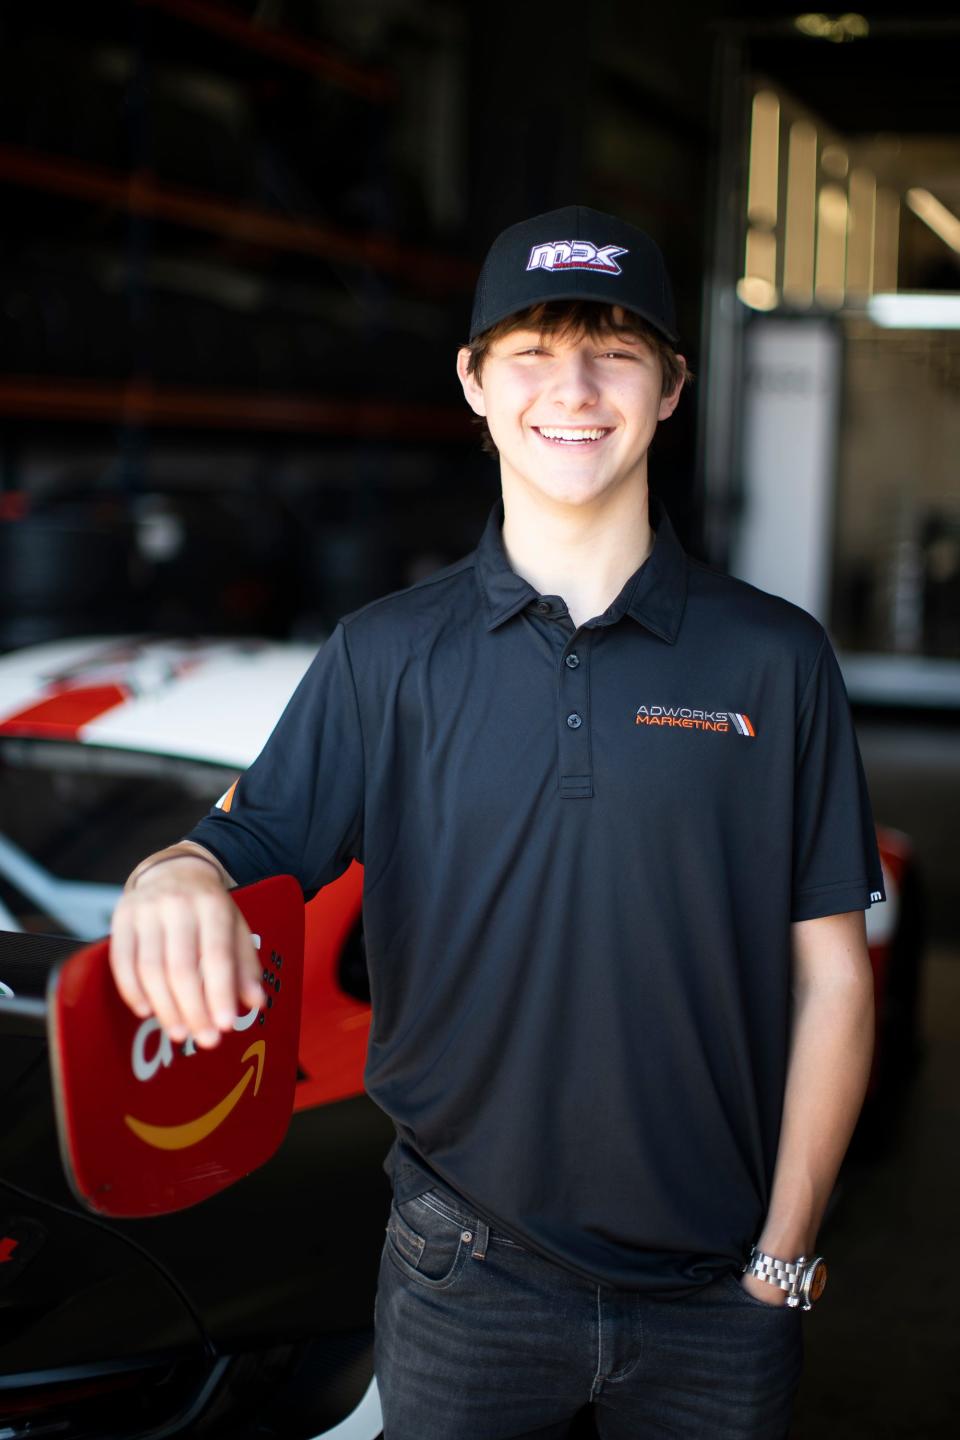 Olentangy Liberty senior Seth Lucas is well on his way to a career in sports car racing, having started in go-karts at age 12. He drives for MDK Motorsports, which is in Licking County.